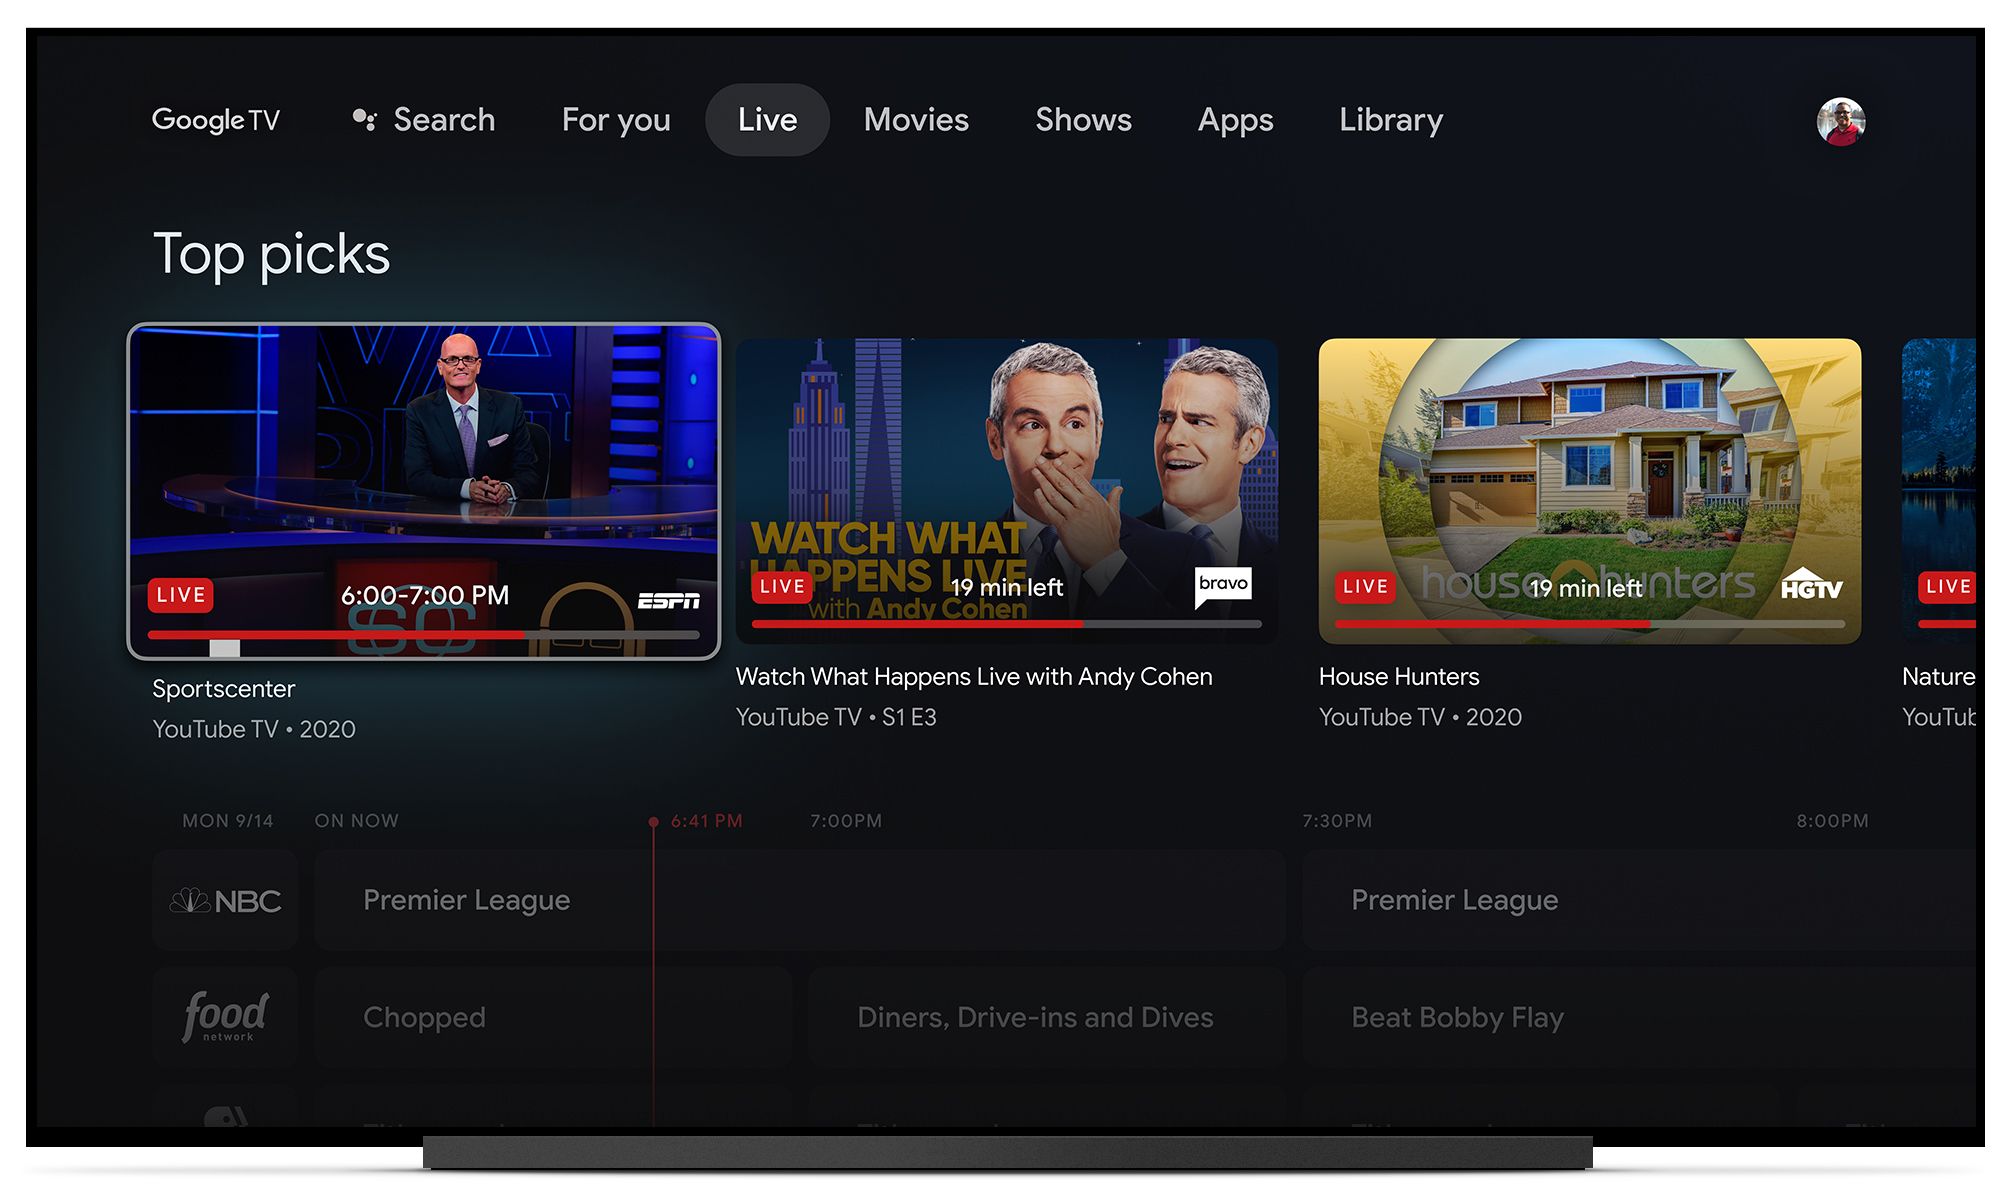 Google TV is the Android TV skin for the new Google Chromecast